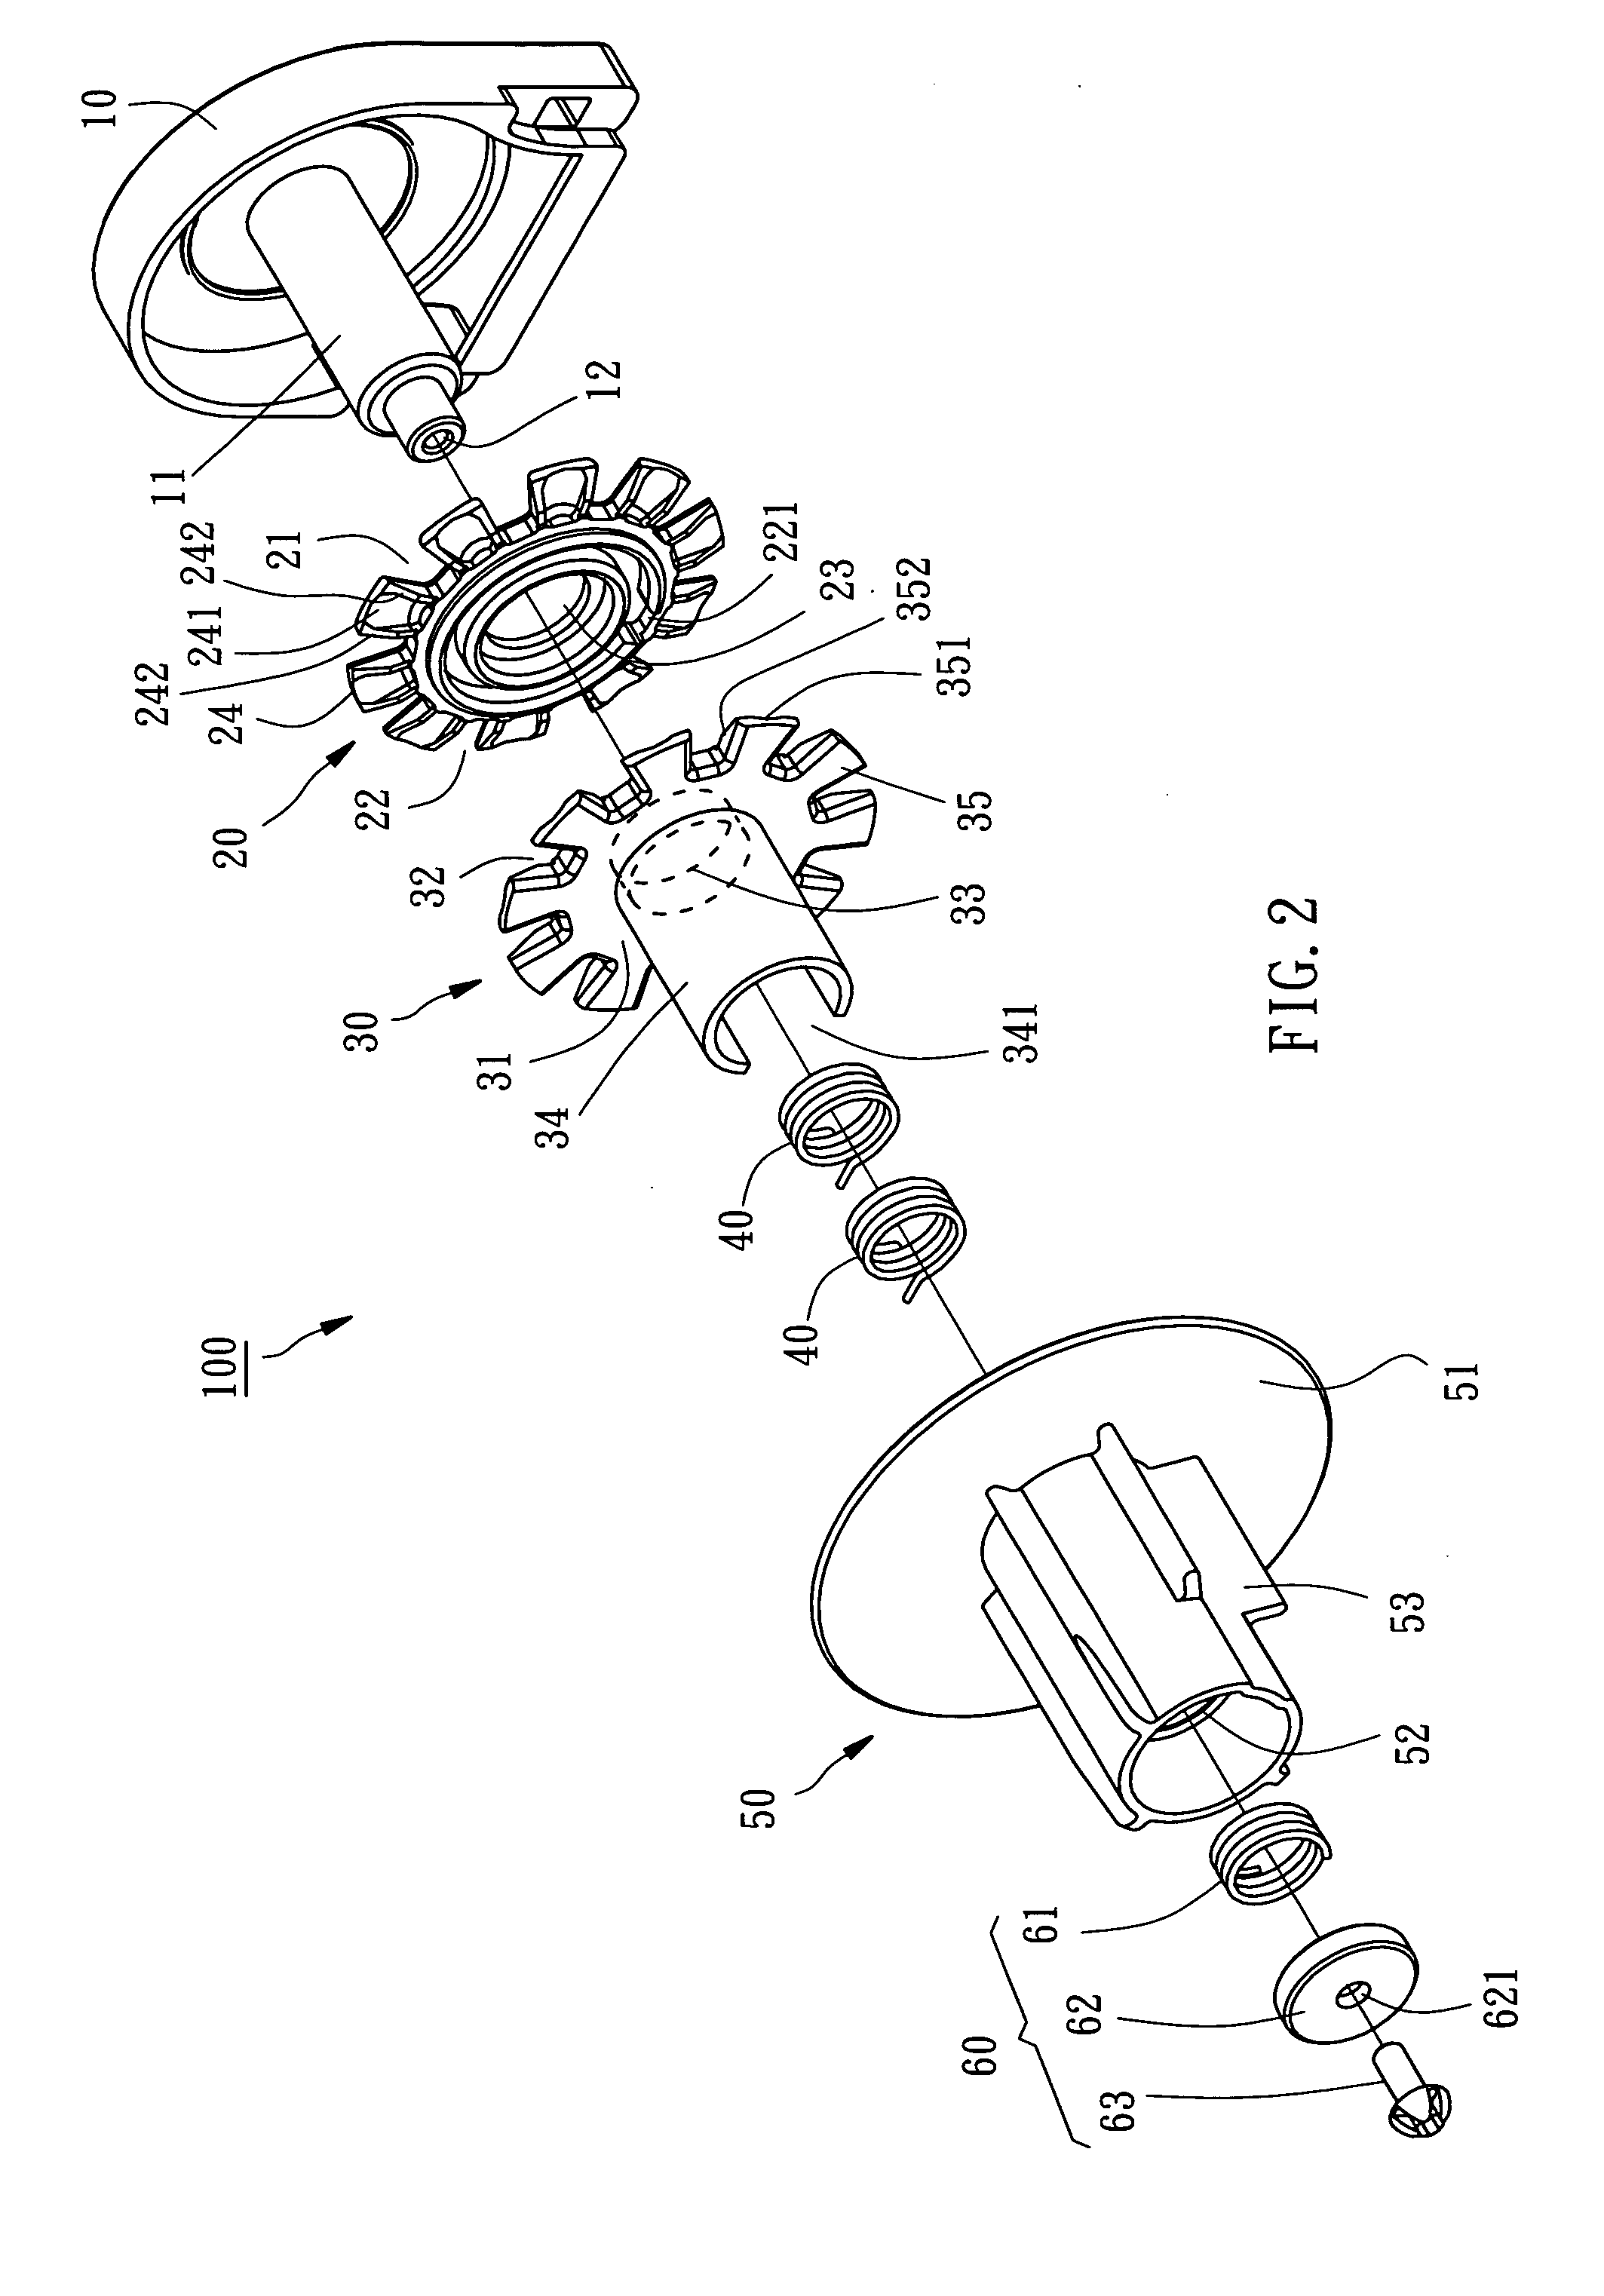 Cord-driven rotator for driving roller of window blind